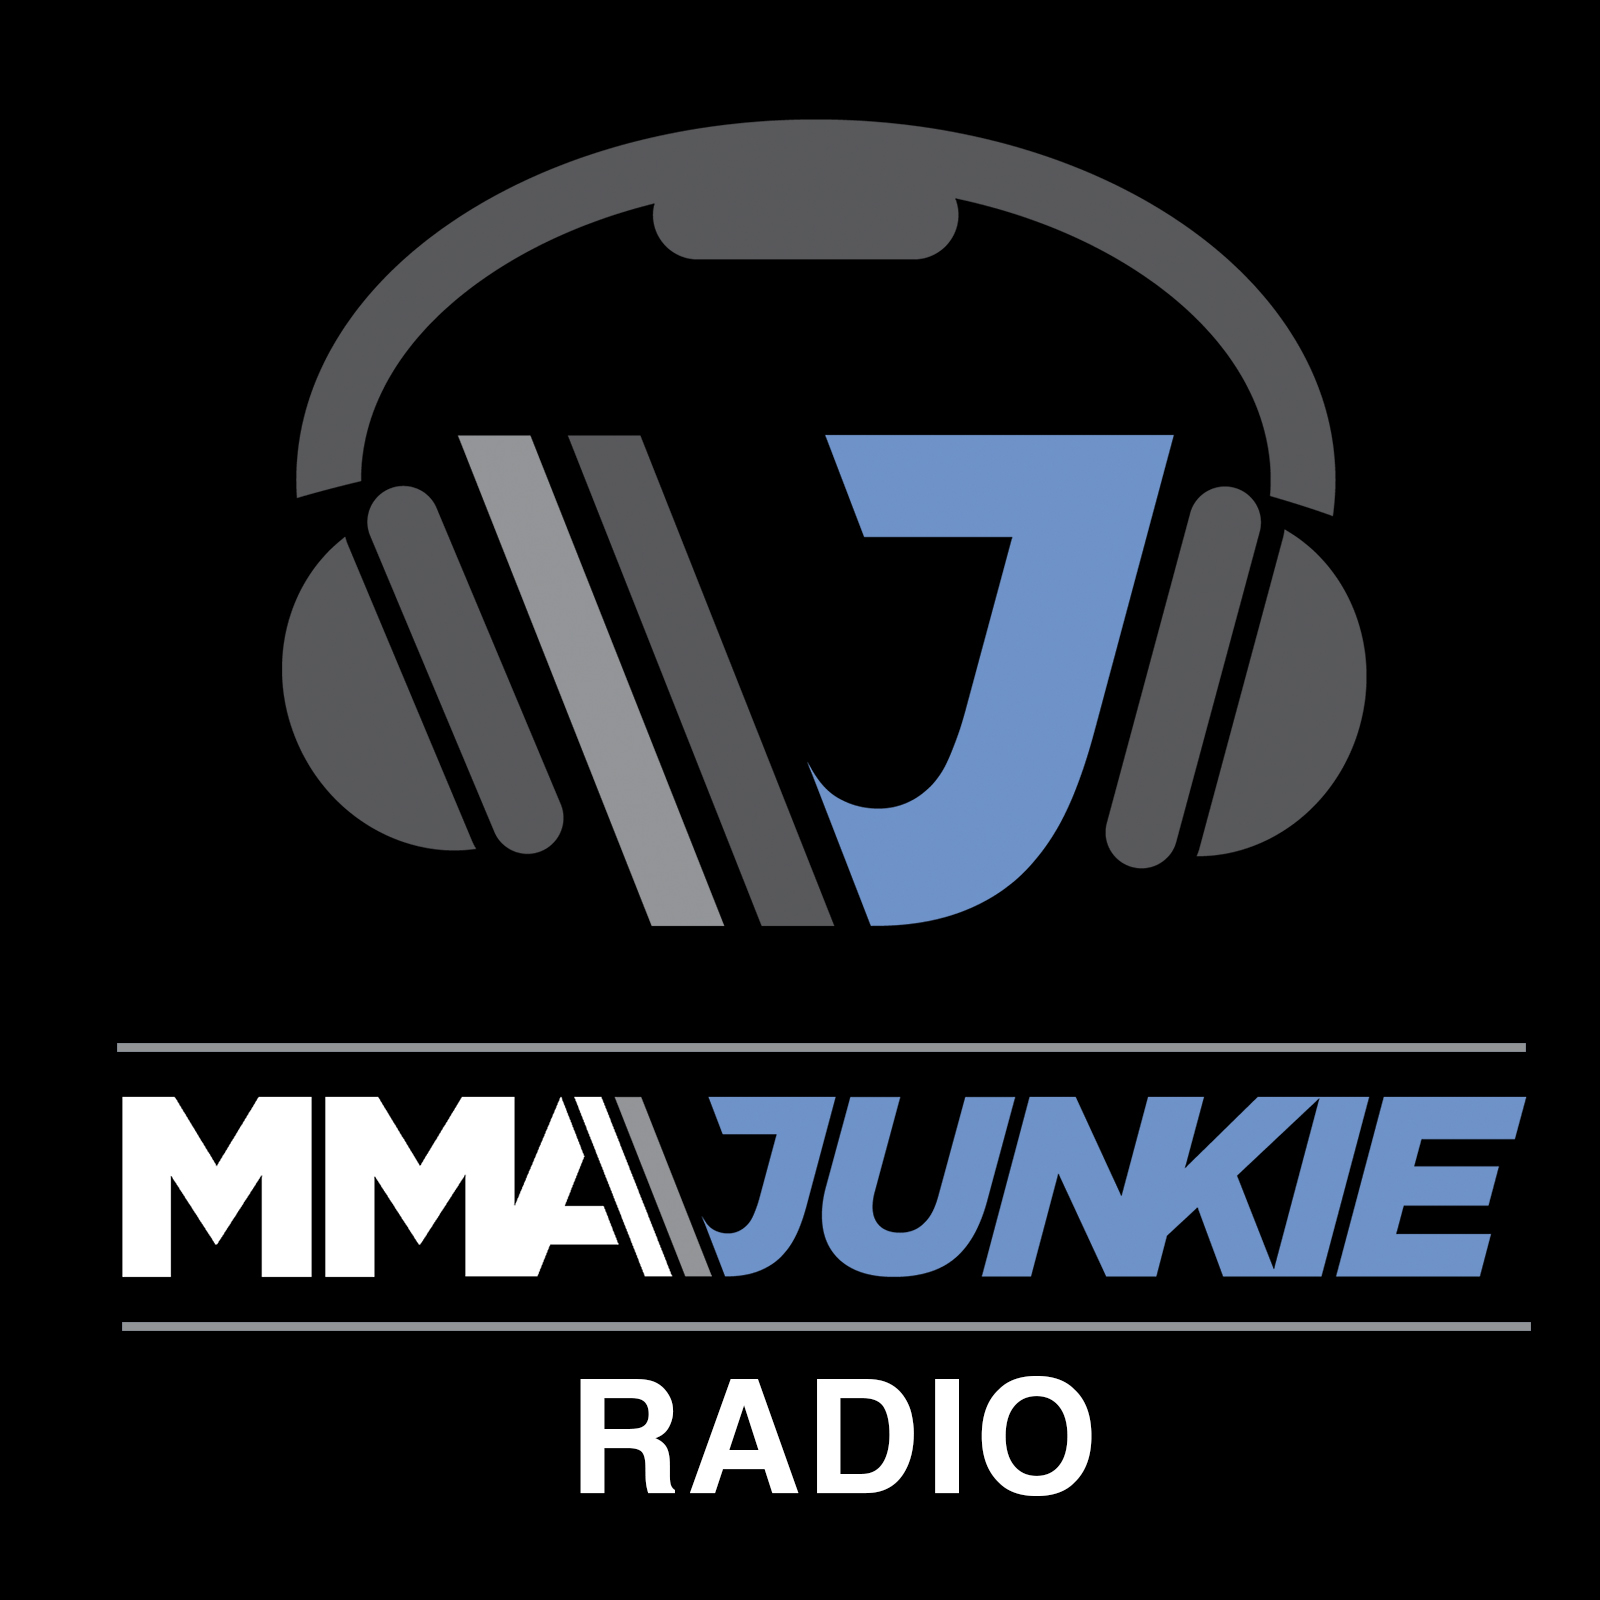 Ep. #3398: Dana White makes a lot of announcements, Michael C Williams interview, more